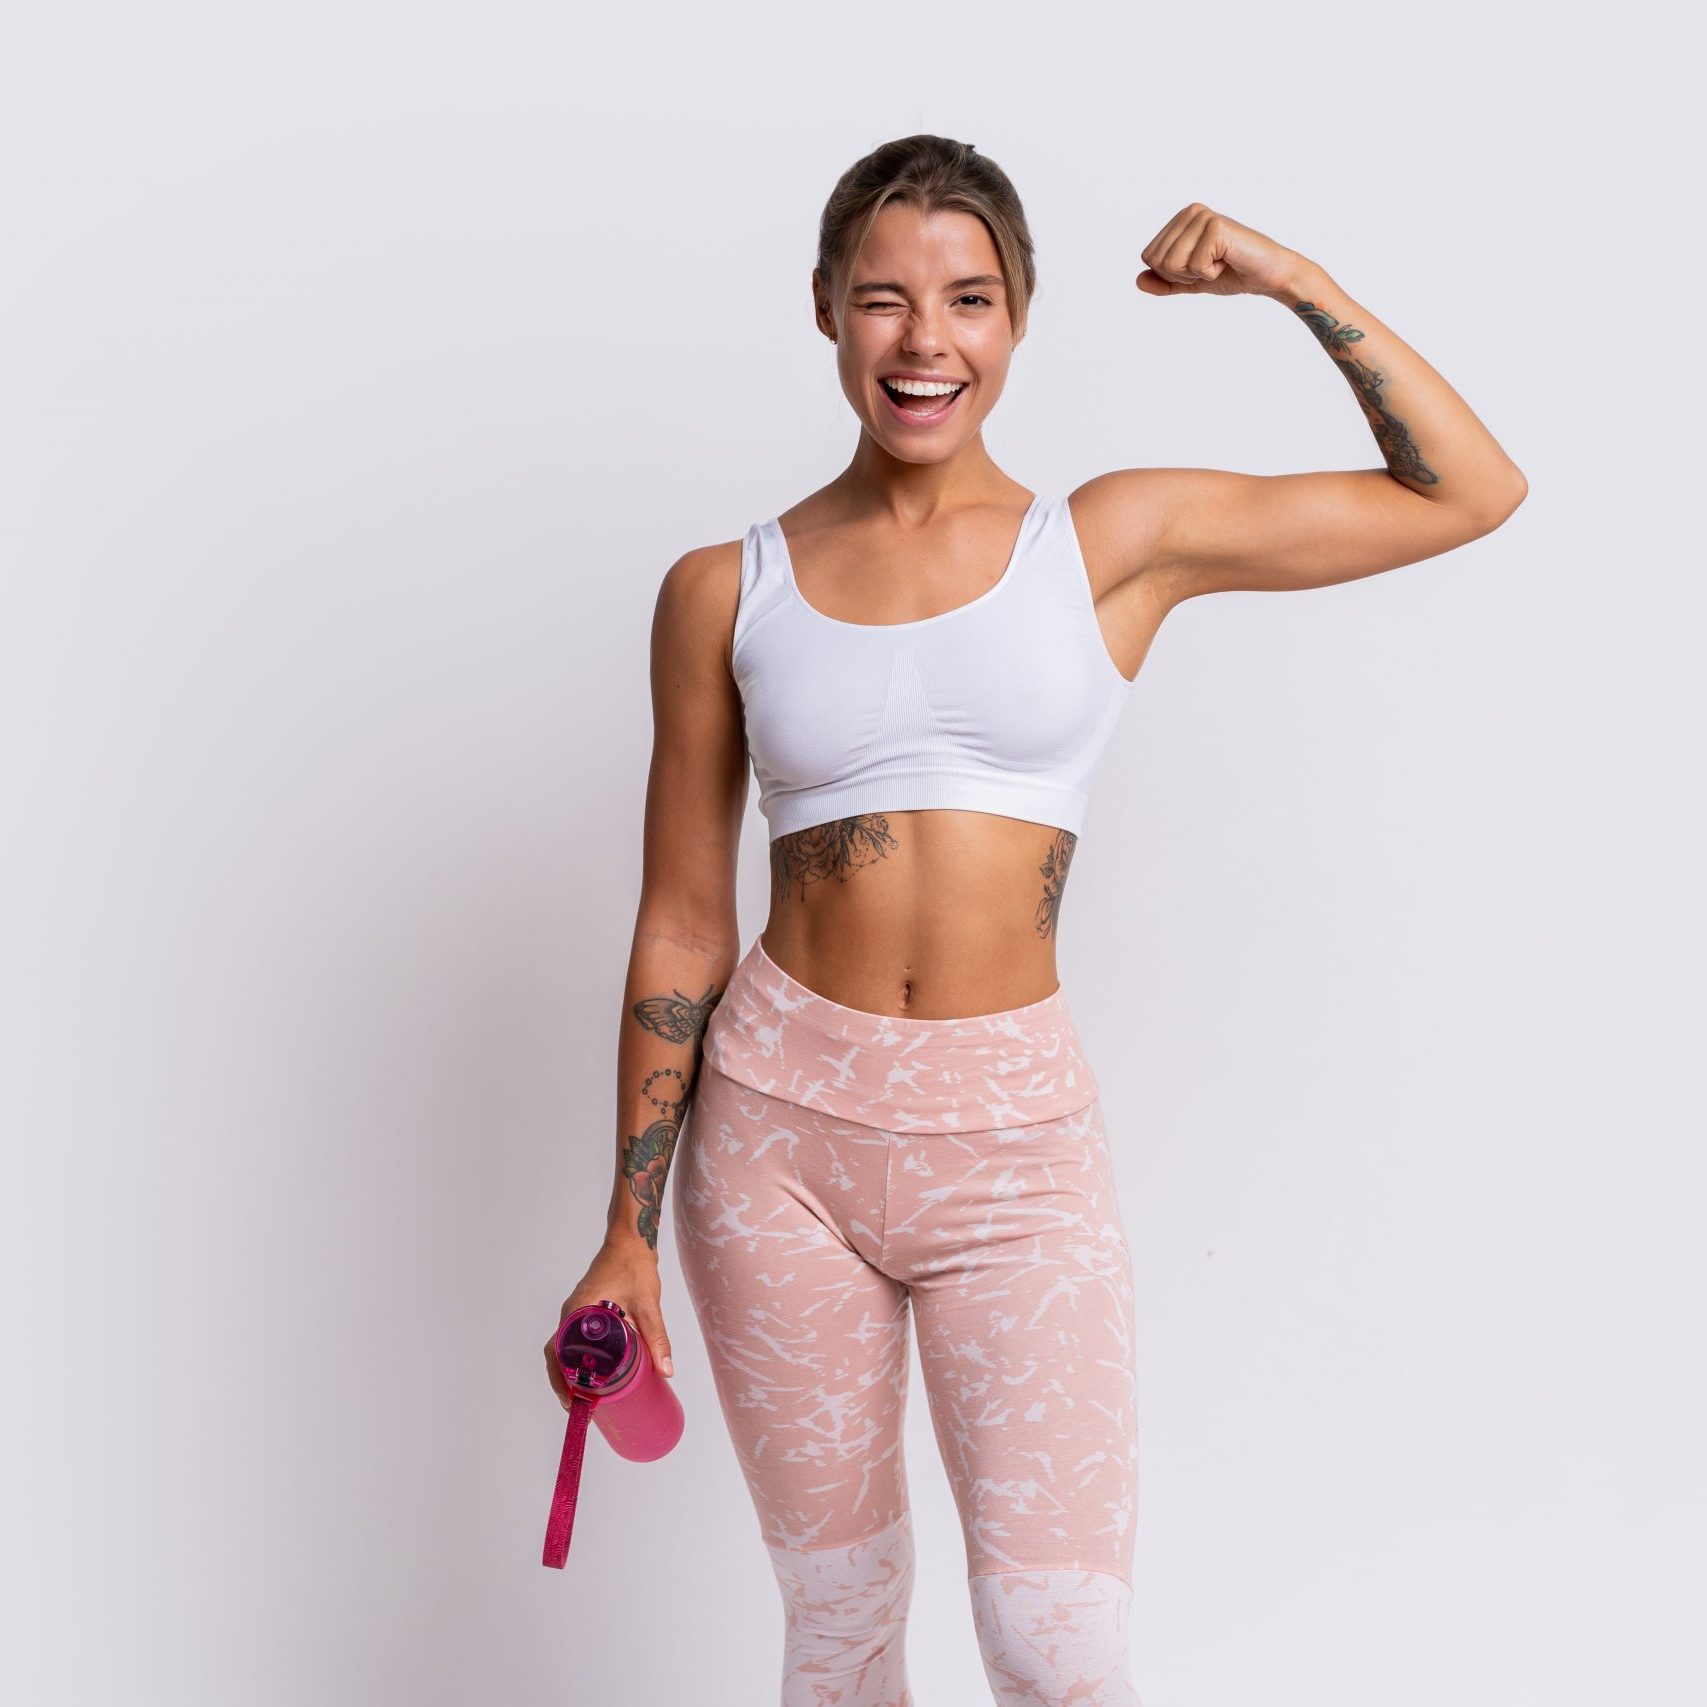 Fit blond woman with perfect smile in stylish sportswear looking at camera and holding bottle of water over white background. Demonstrate muscles.